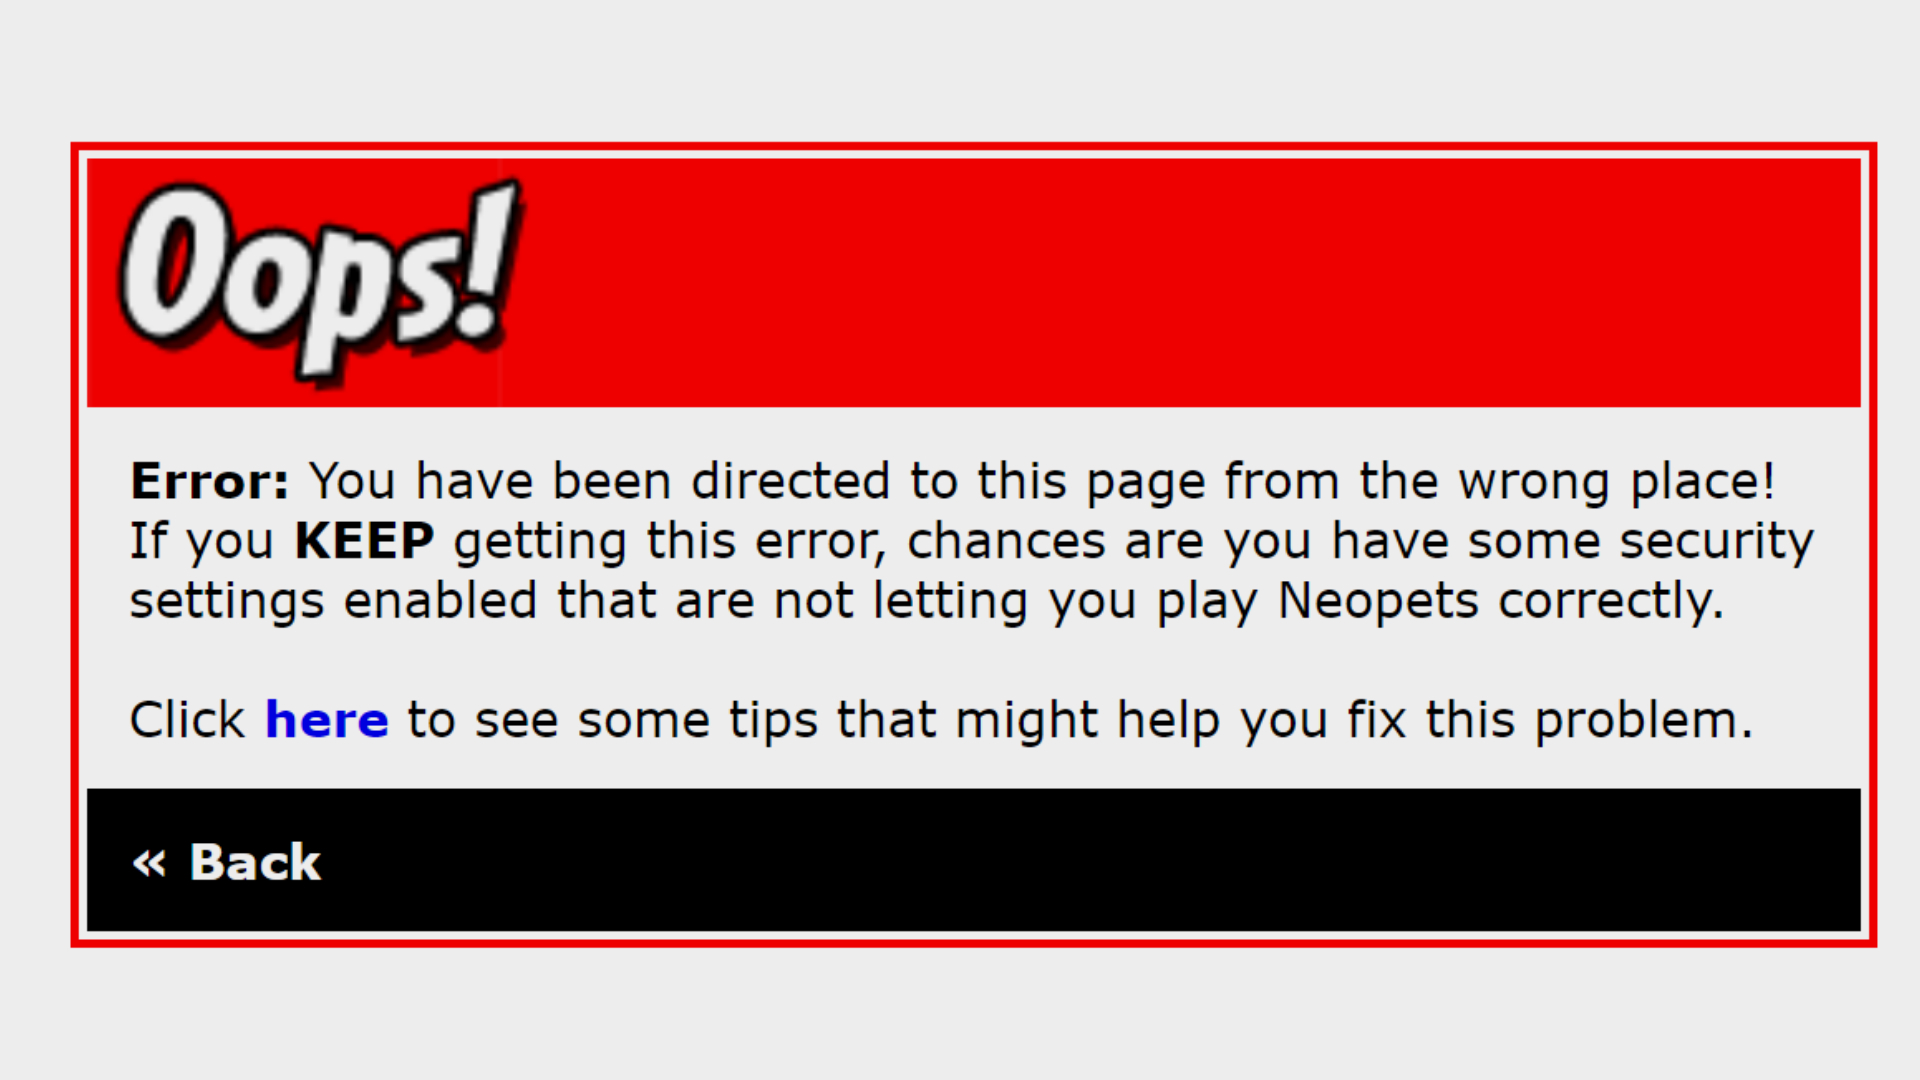 The Neopets error message on account deletion.